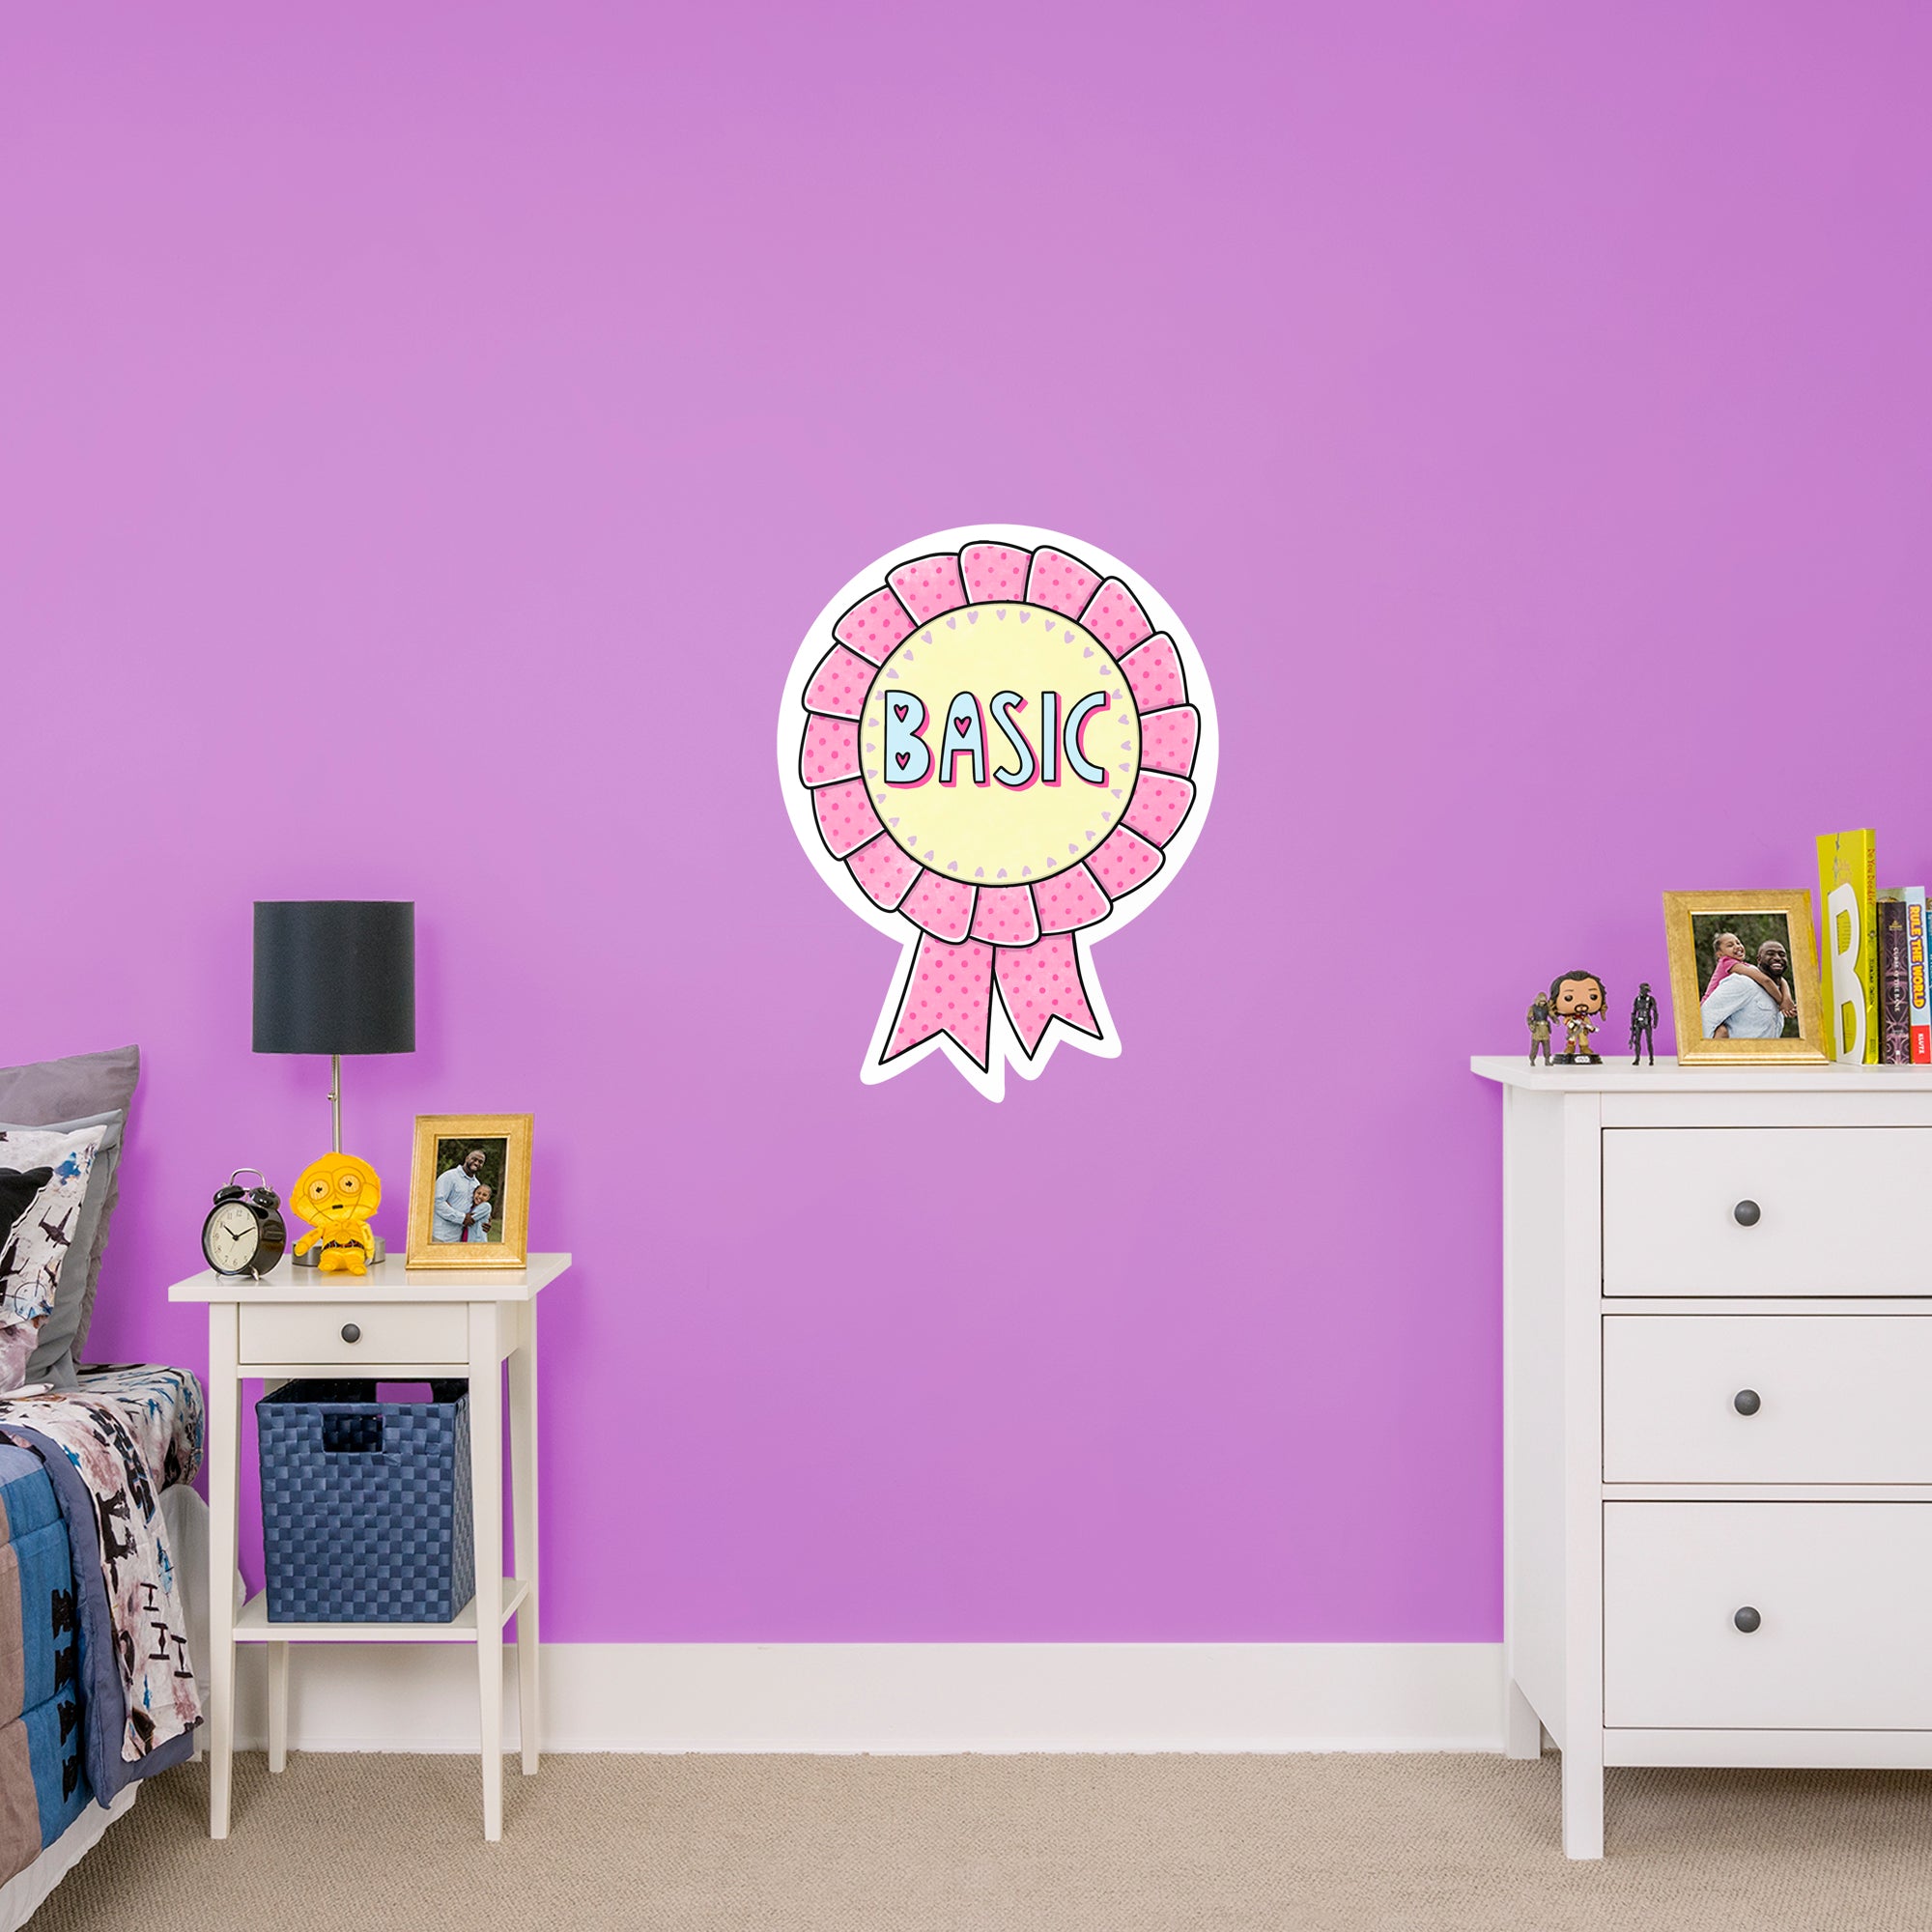 Basic - Officially Licensed Big Moods Removable Wall Decal XL by Fathead | Vinyl